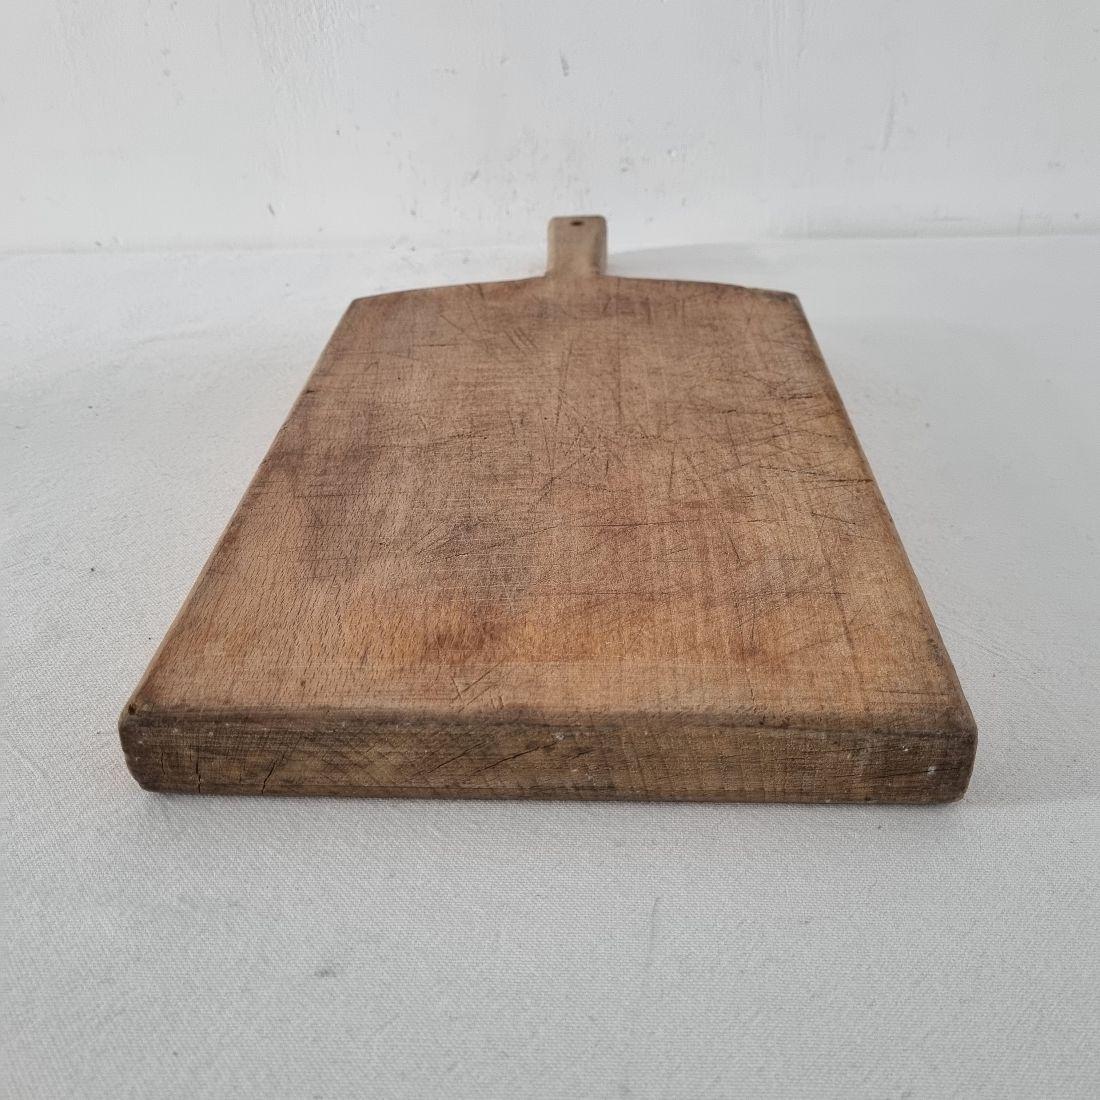 Pair of Two Rare French 19th Century, Wooden Chopping or Cutting Boards 15